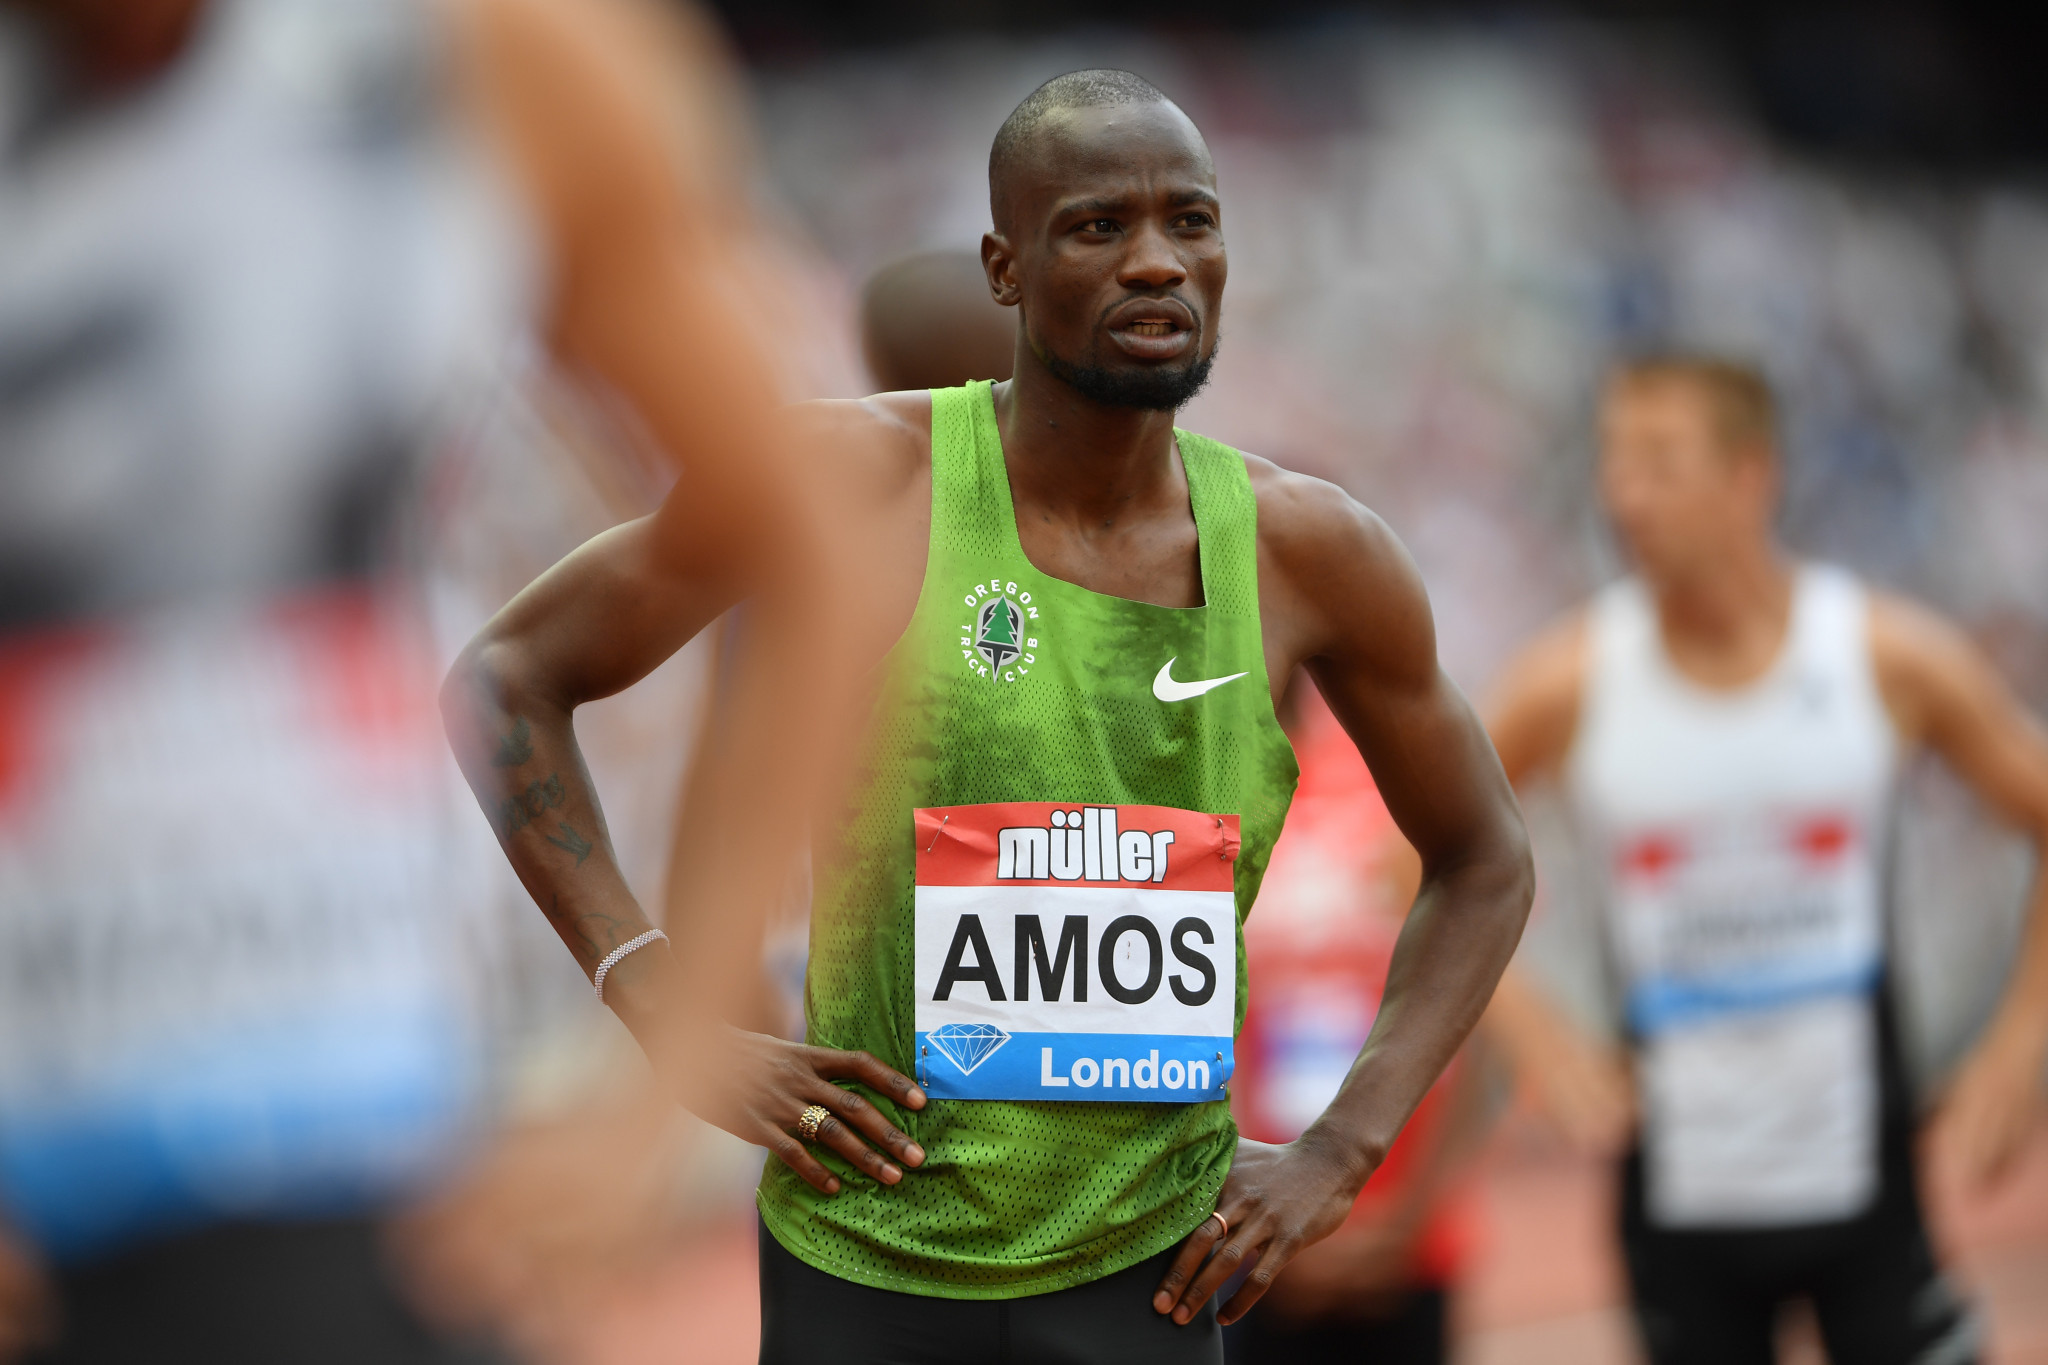 Olympic silver medallist Amos provisionally suspended for doping prior to World Athletics Championships